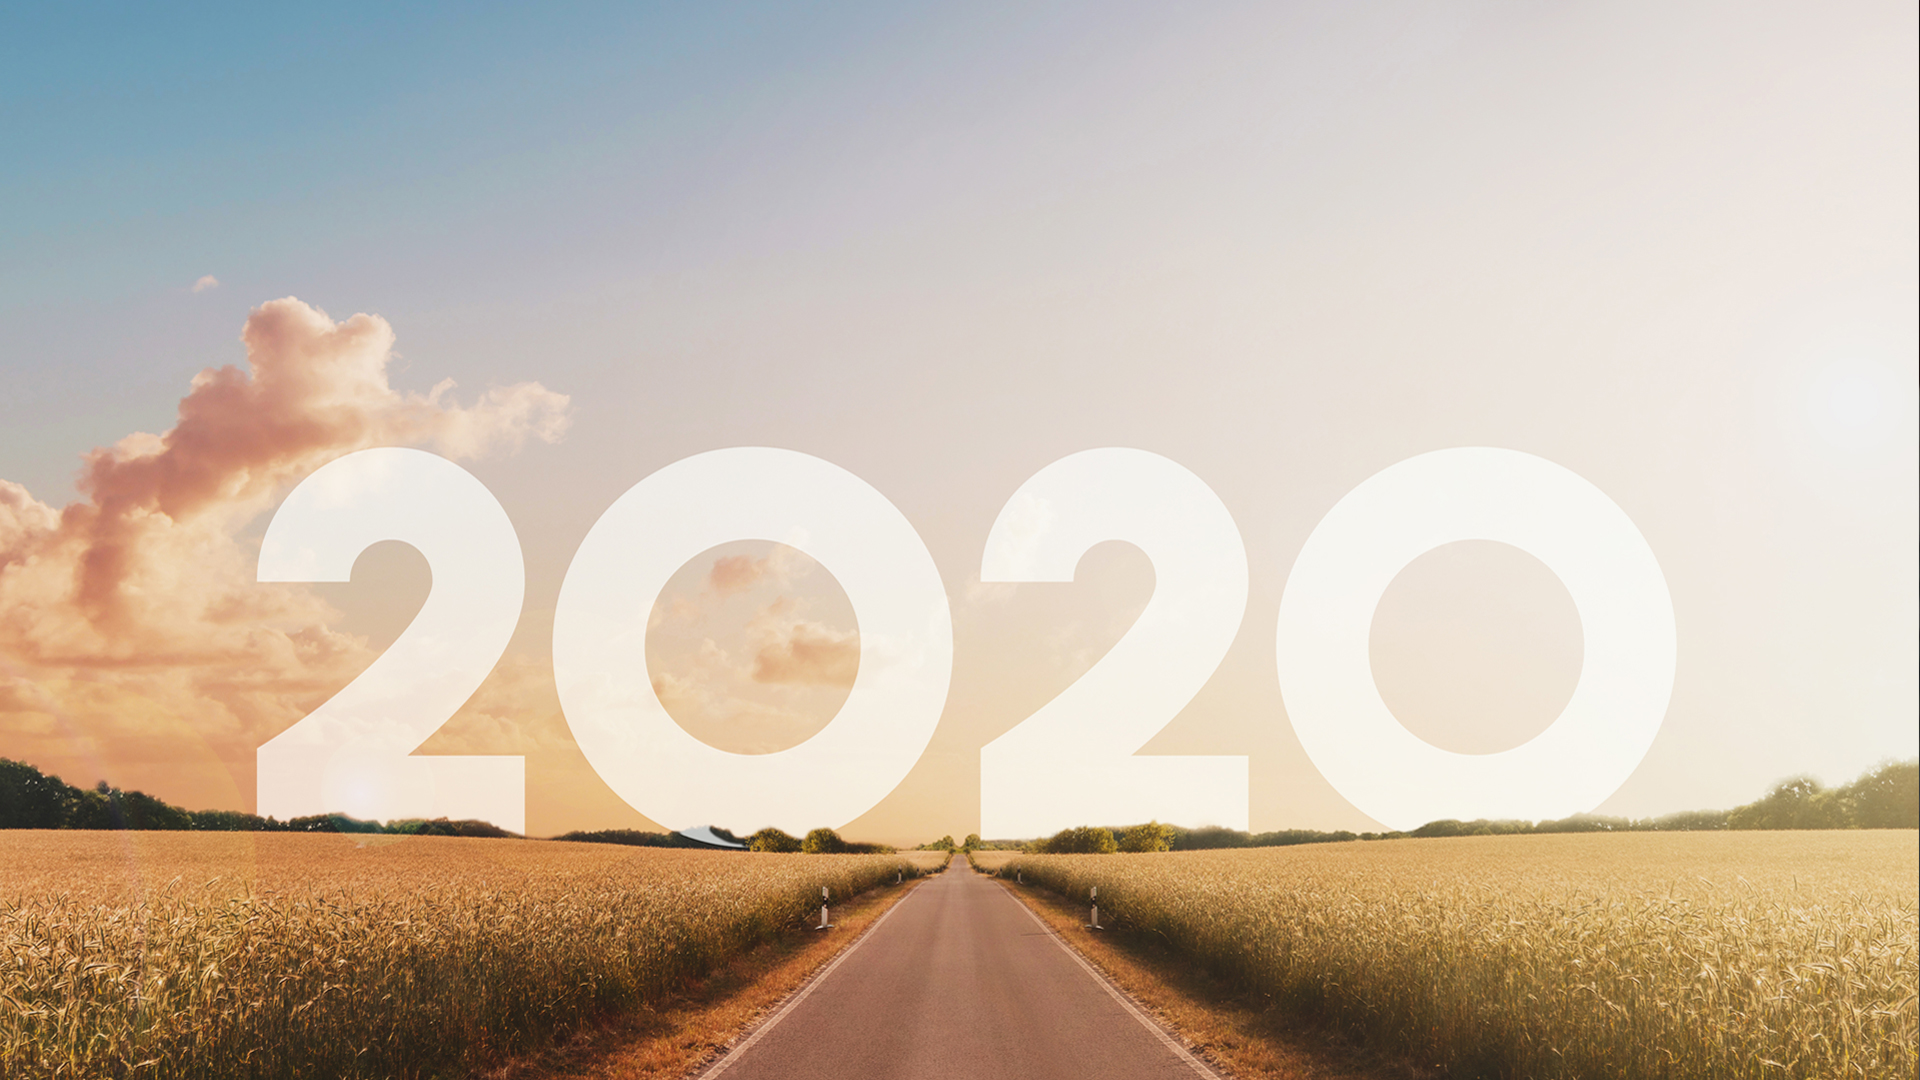 Episode 250 – A Look Back at 2020